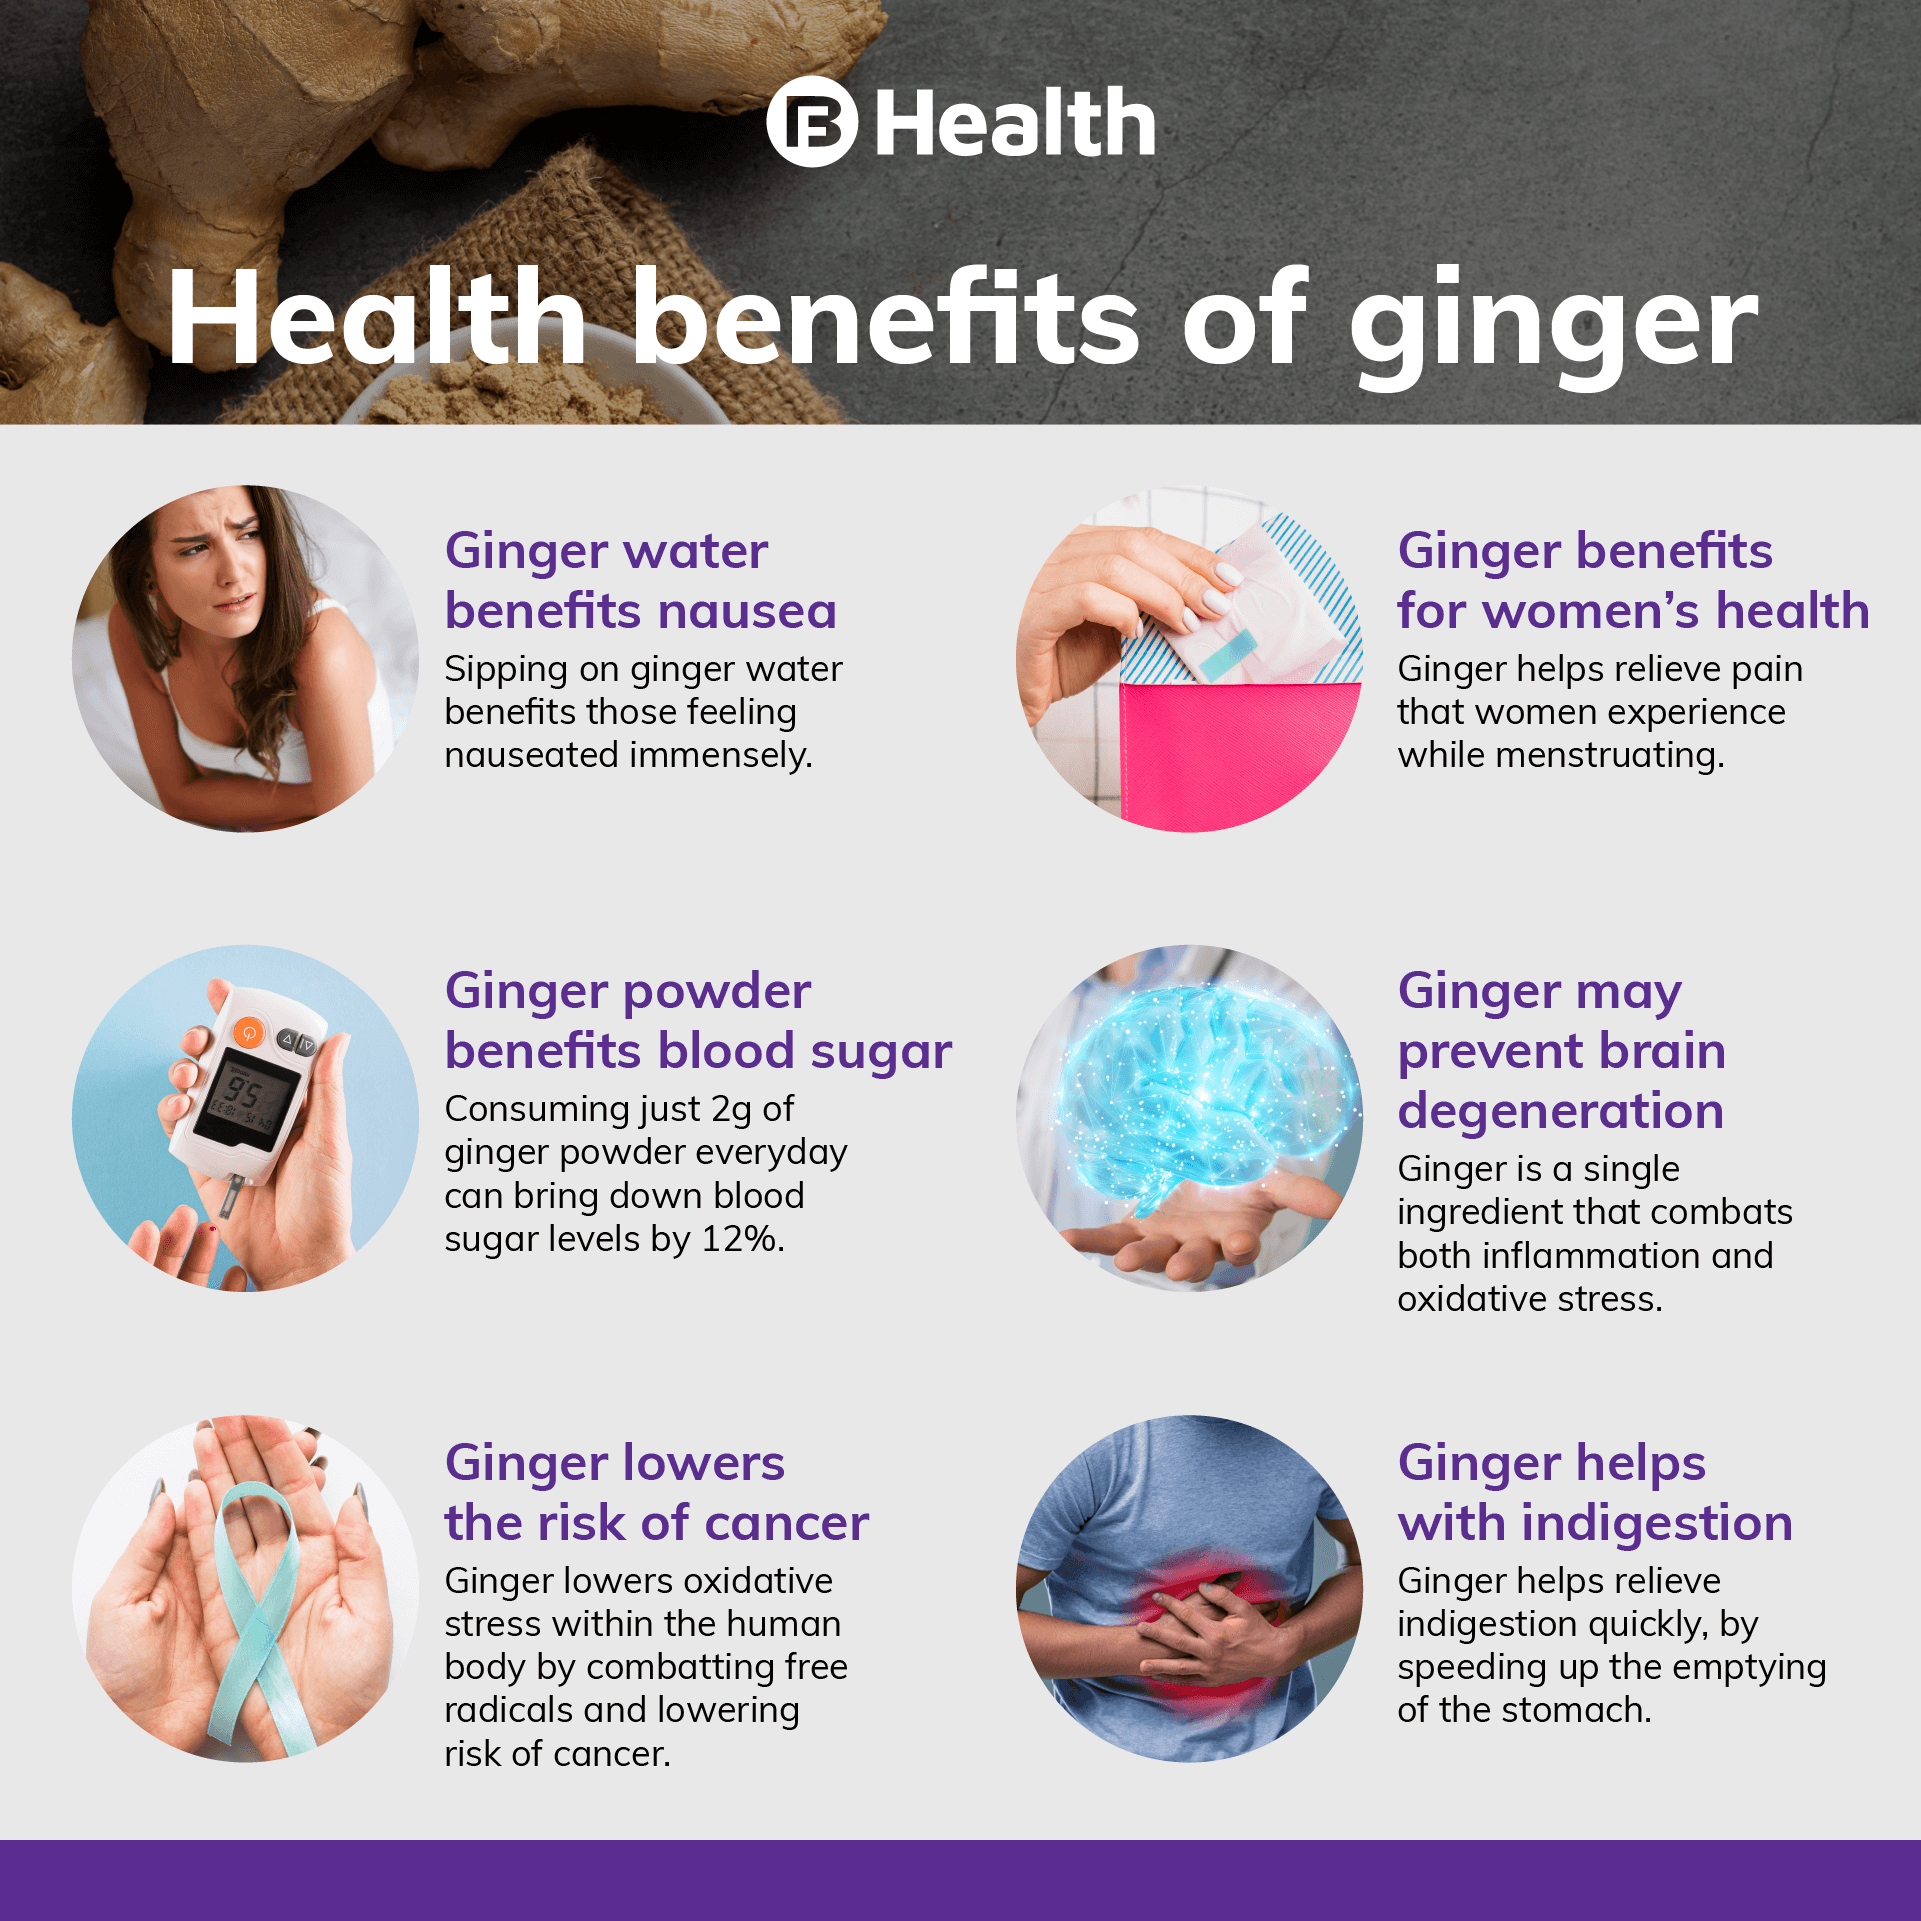 research on ginger health benefits